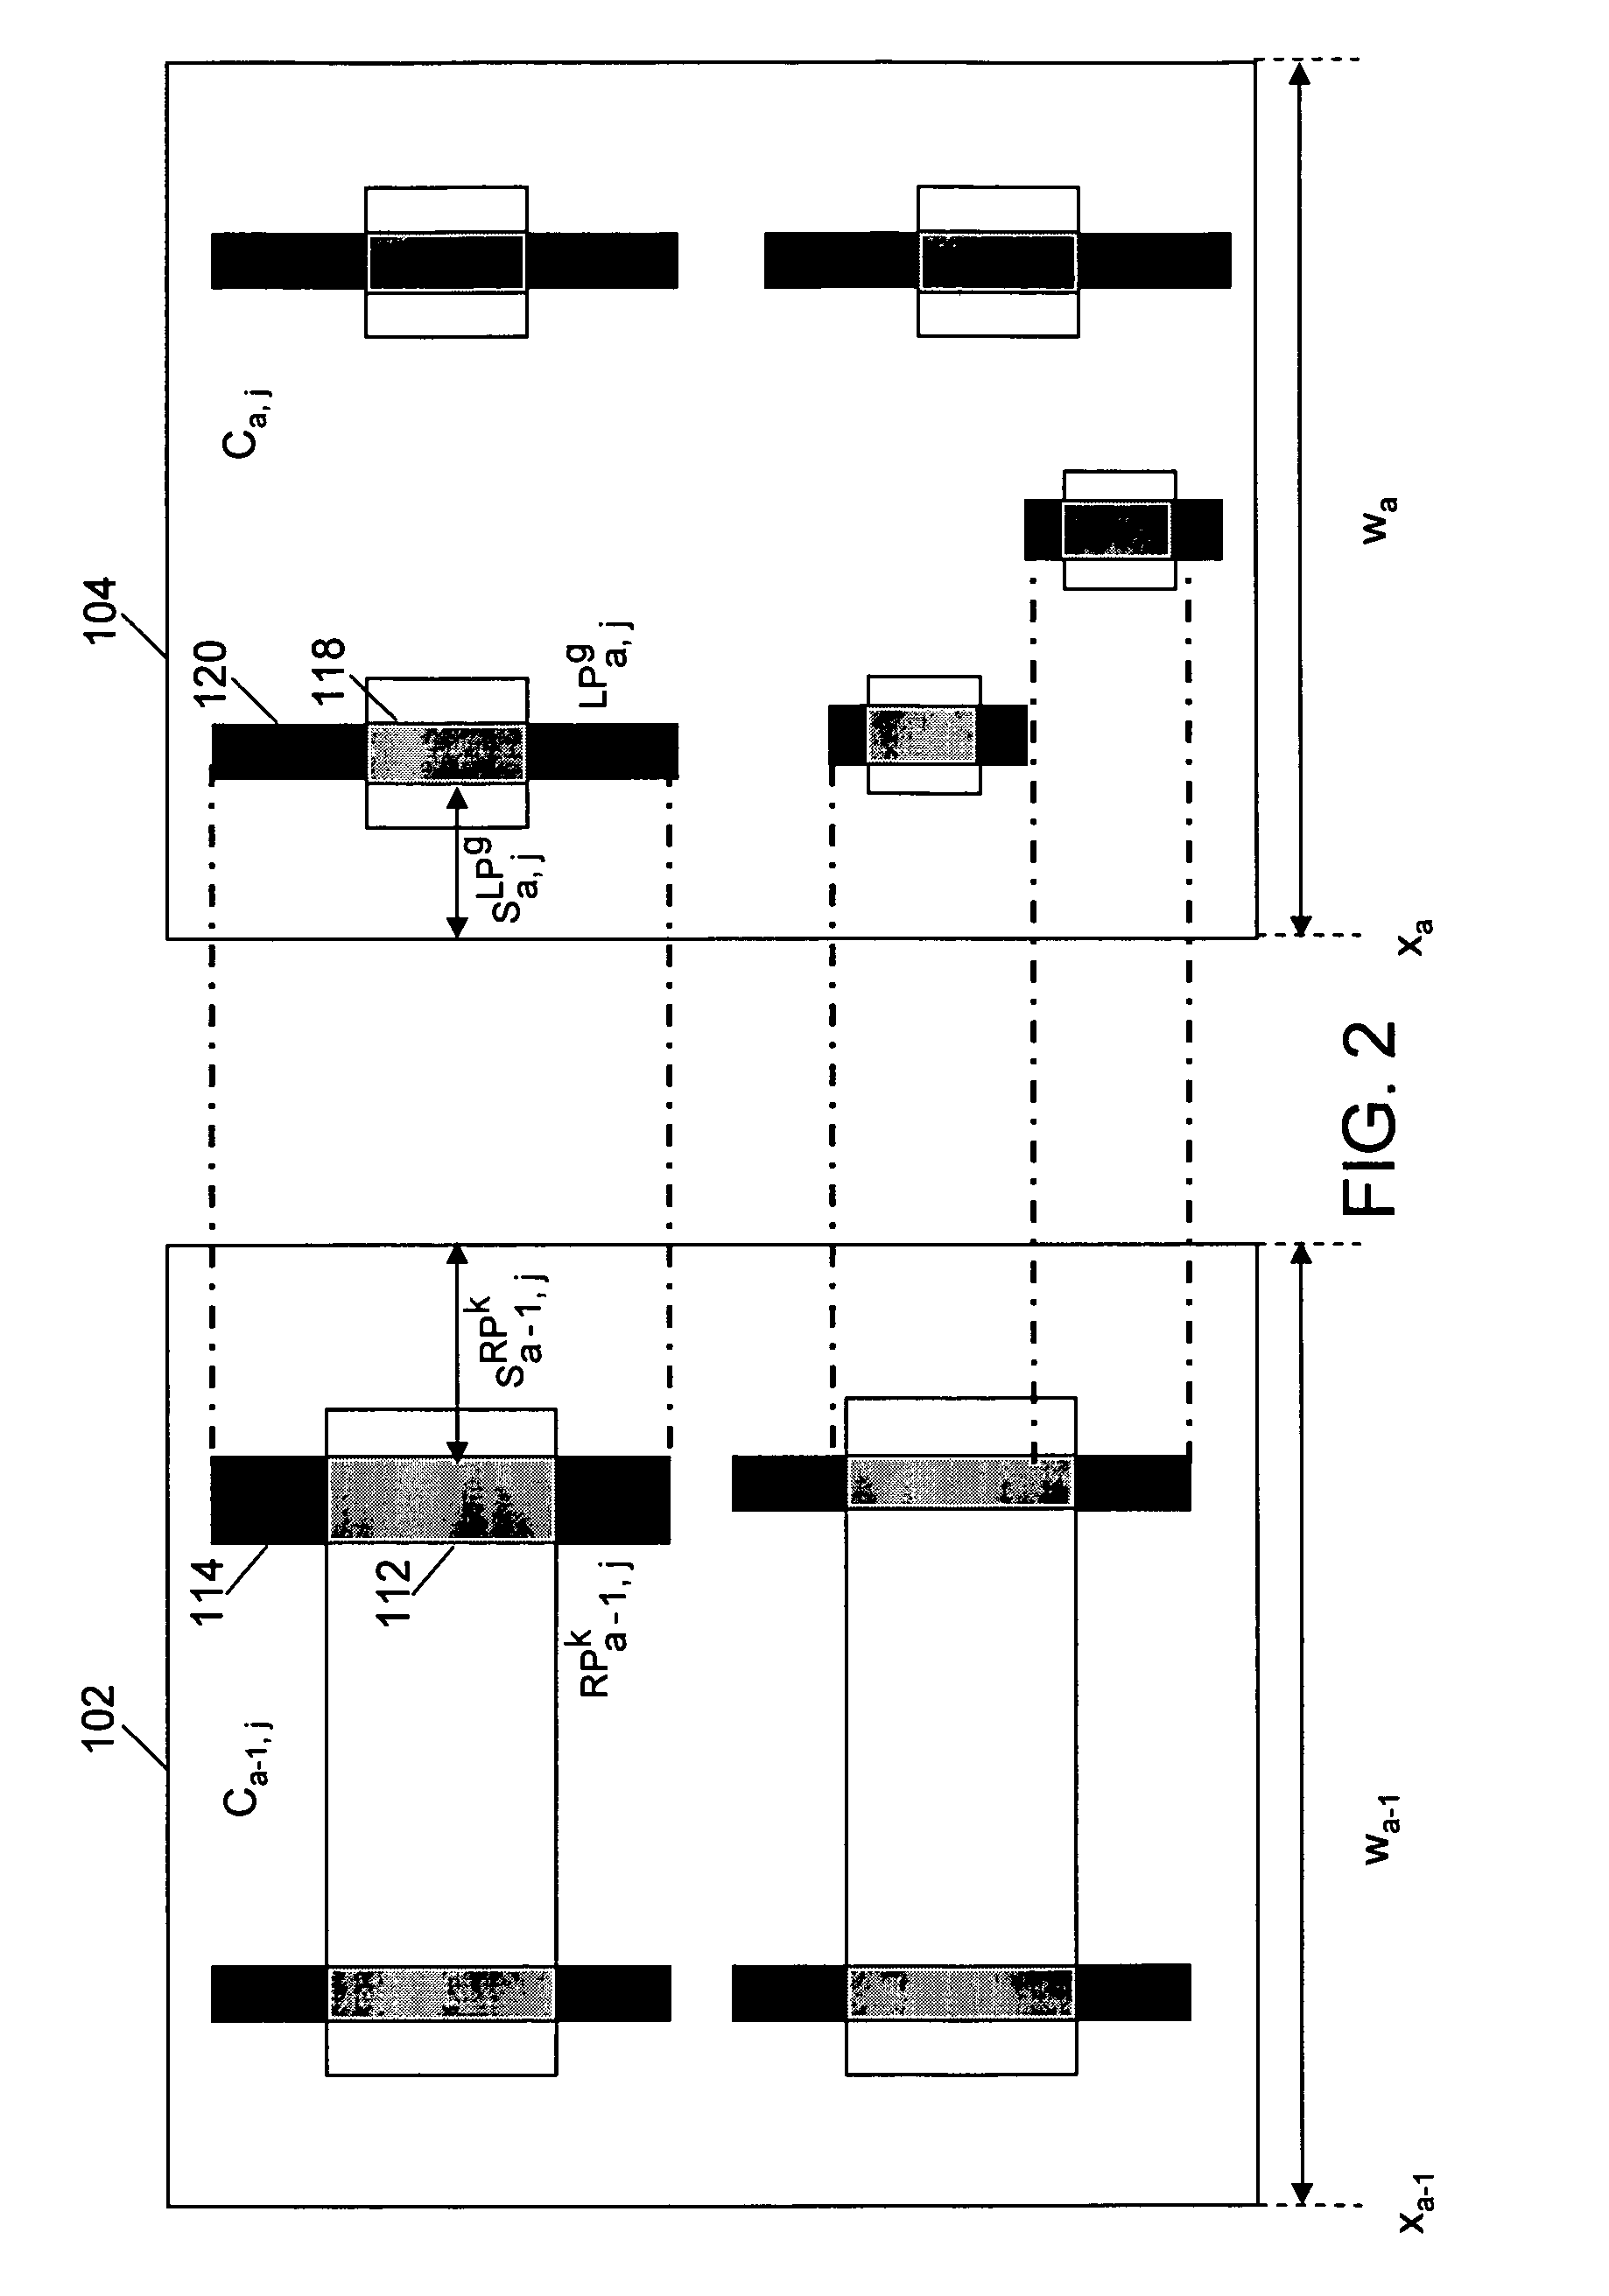 Method and system for placing layout objects in a standard-cell layout